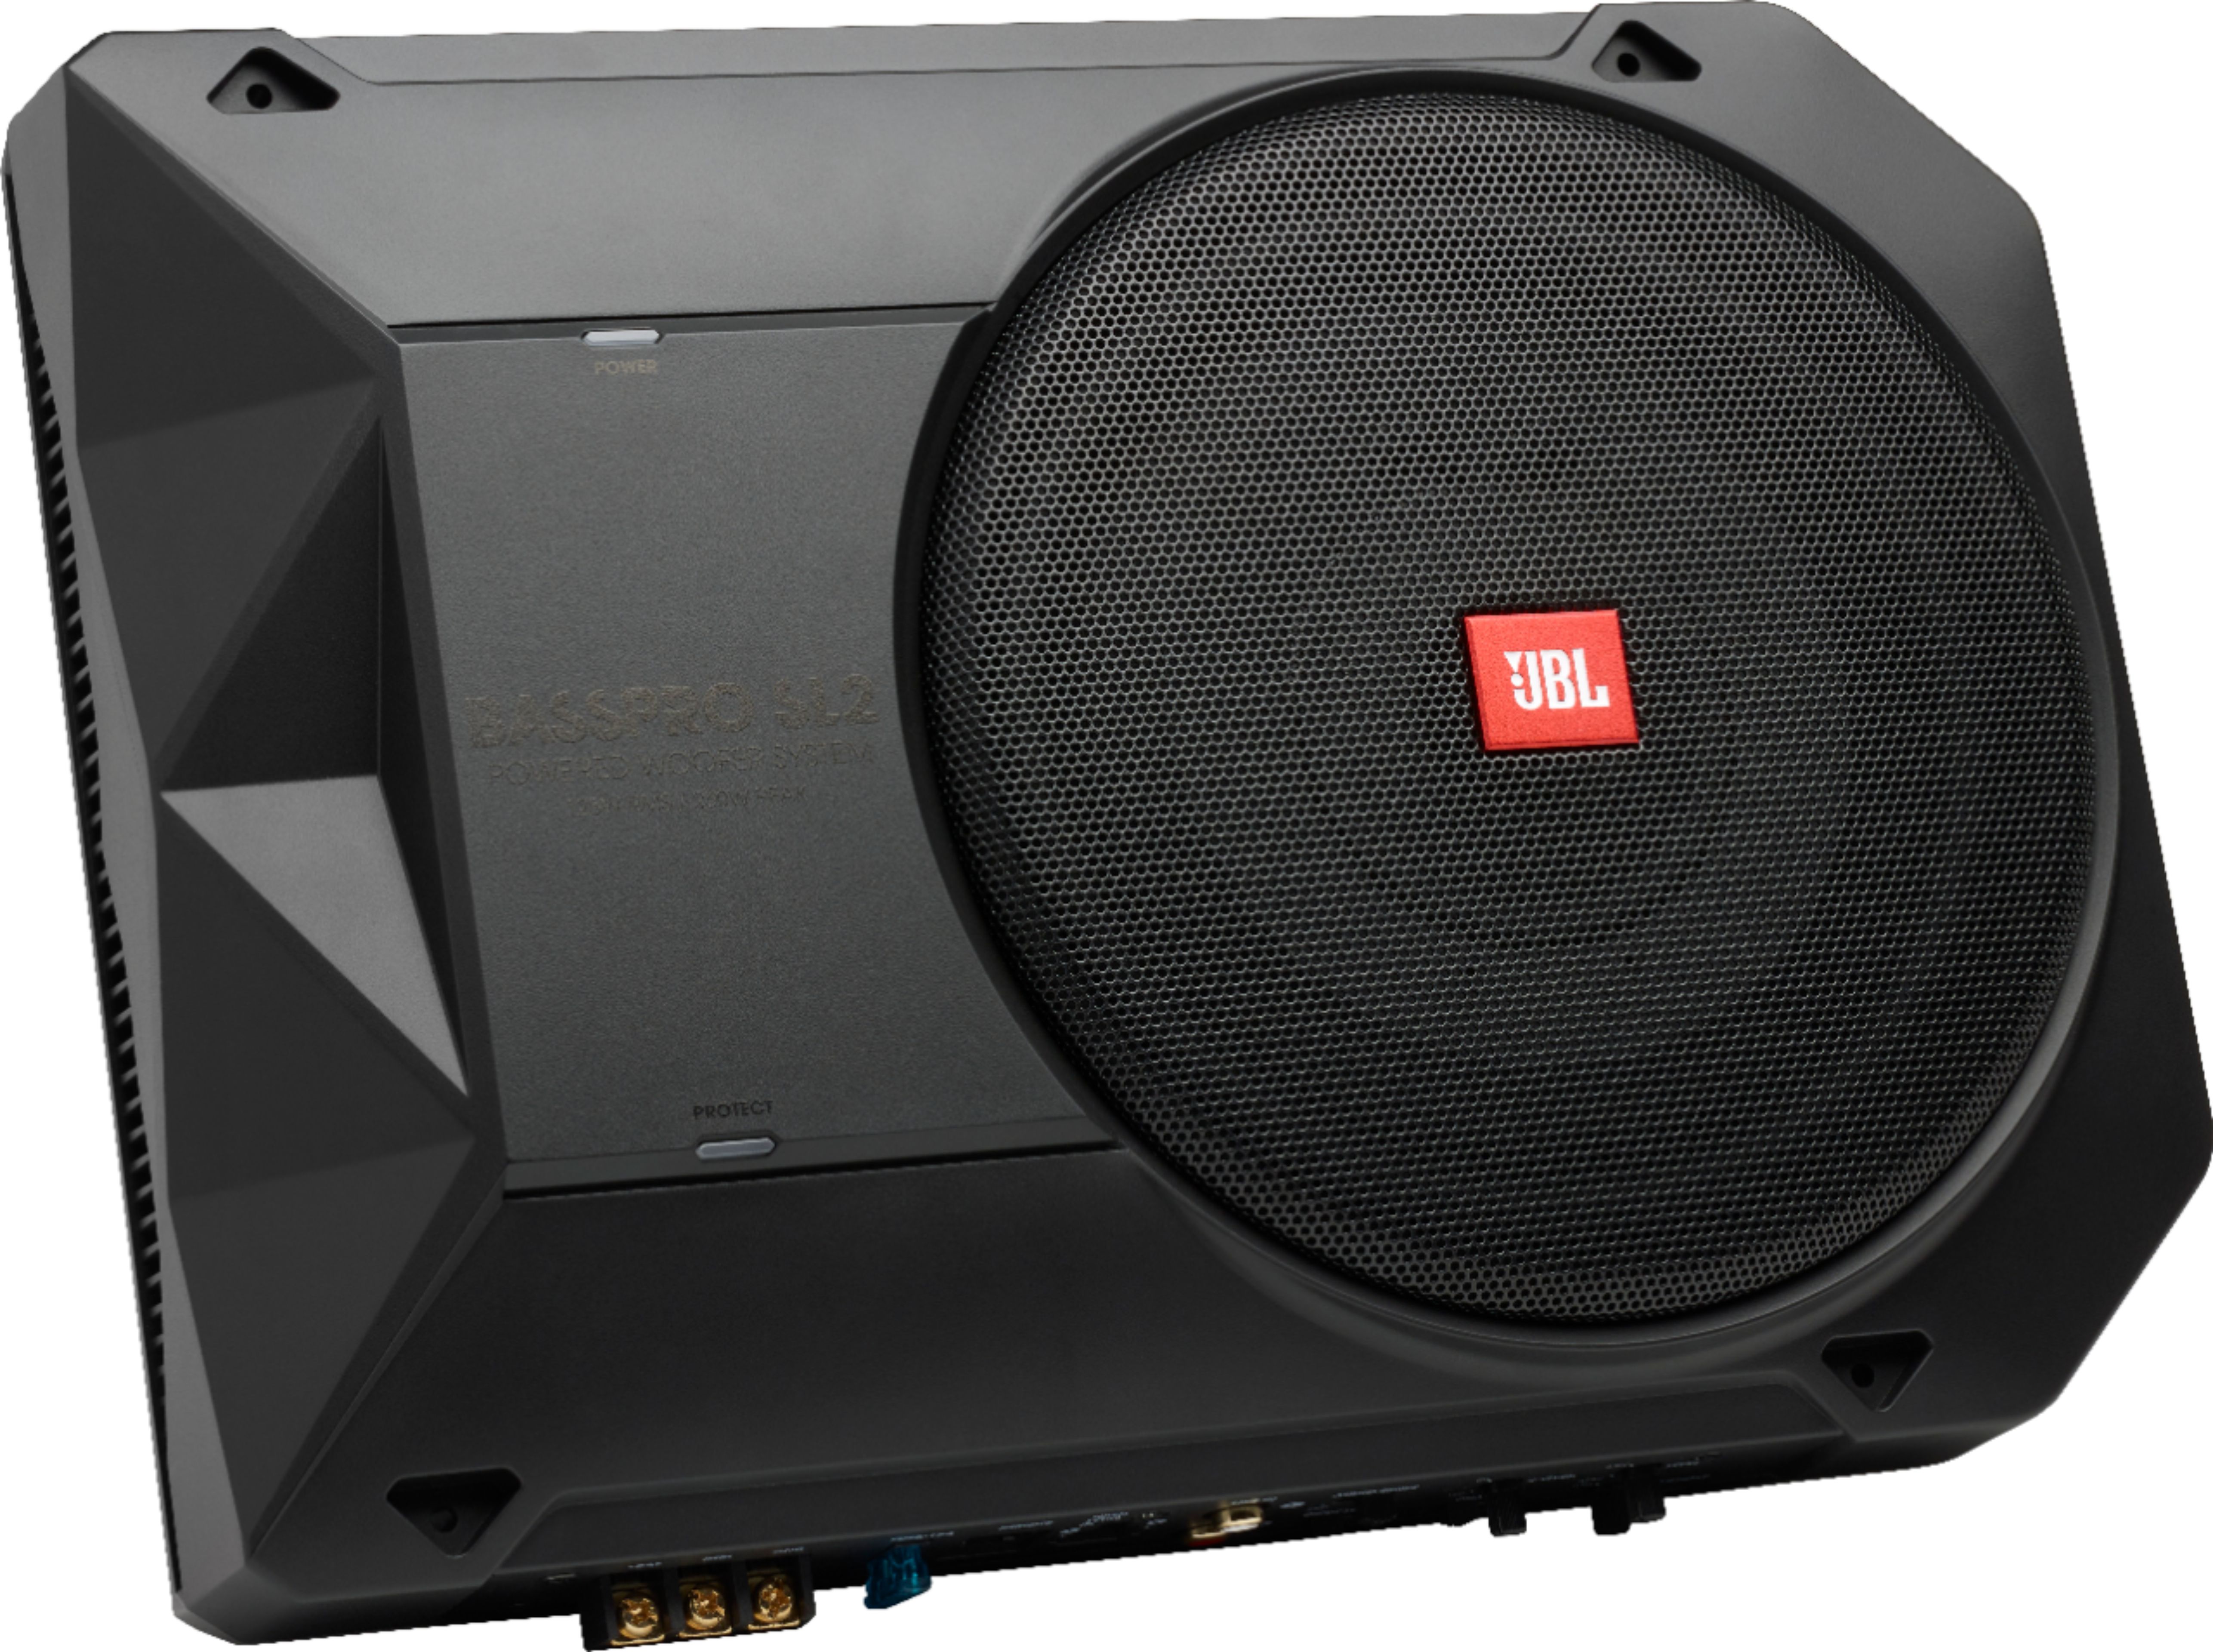 Angle View: JBL - BASSPRO 8" Single-Voice-Coil Loaded Subwoofer Enclosure with Integrated Amp - Black